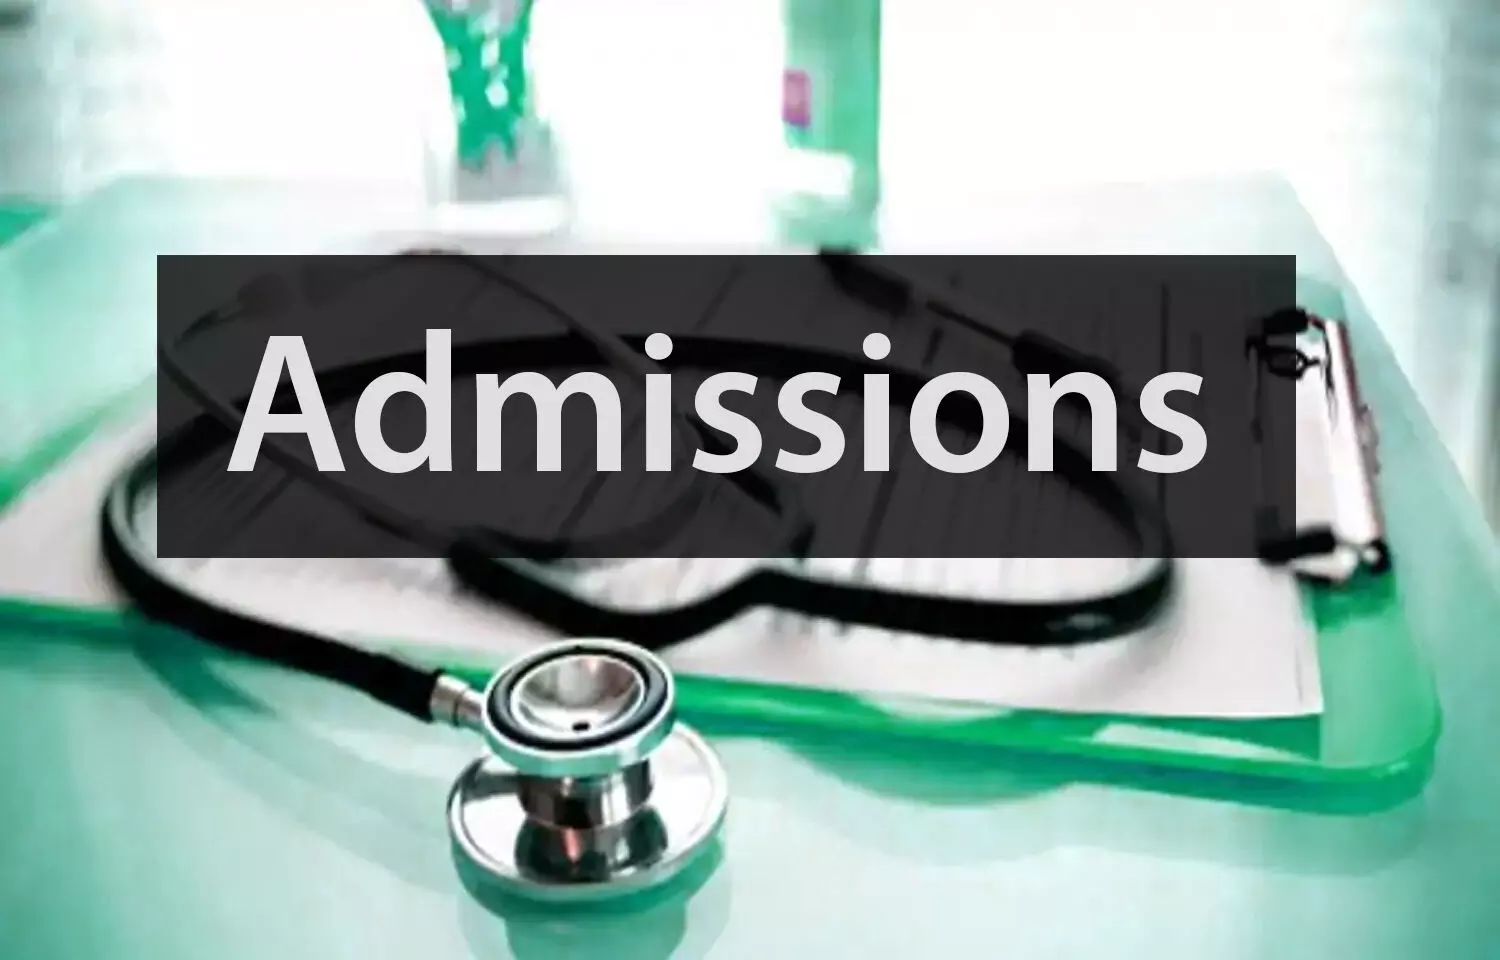 BSc Nursing Admissions 2021 at KNRUHS: Check out eligibility criteria, application process, all admission details here